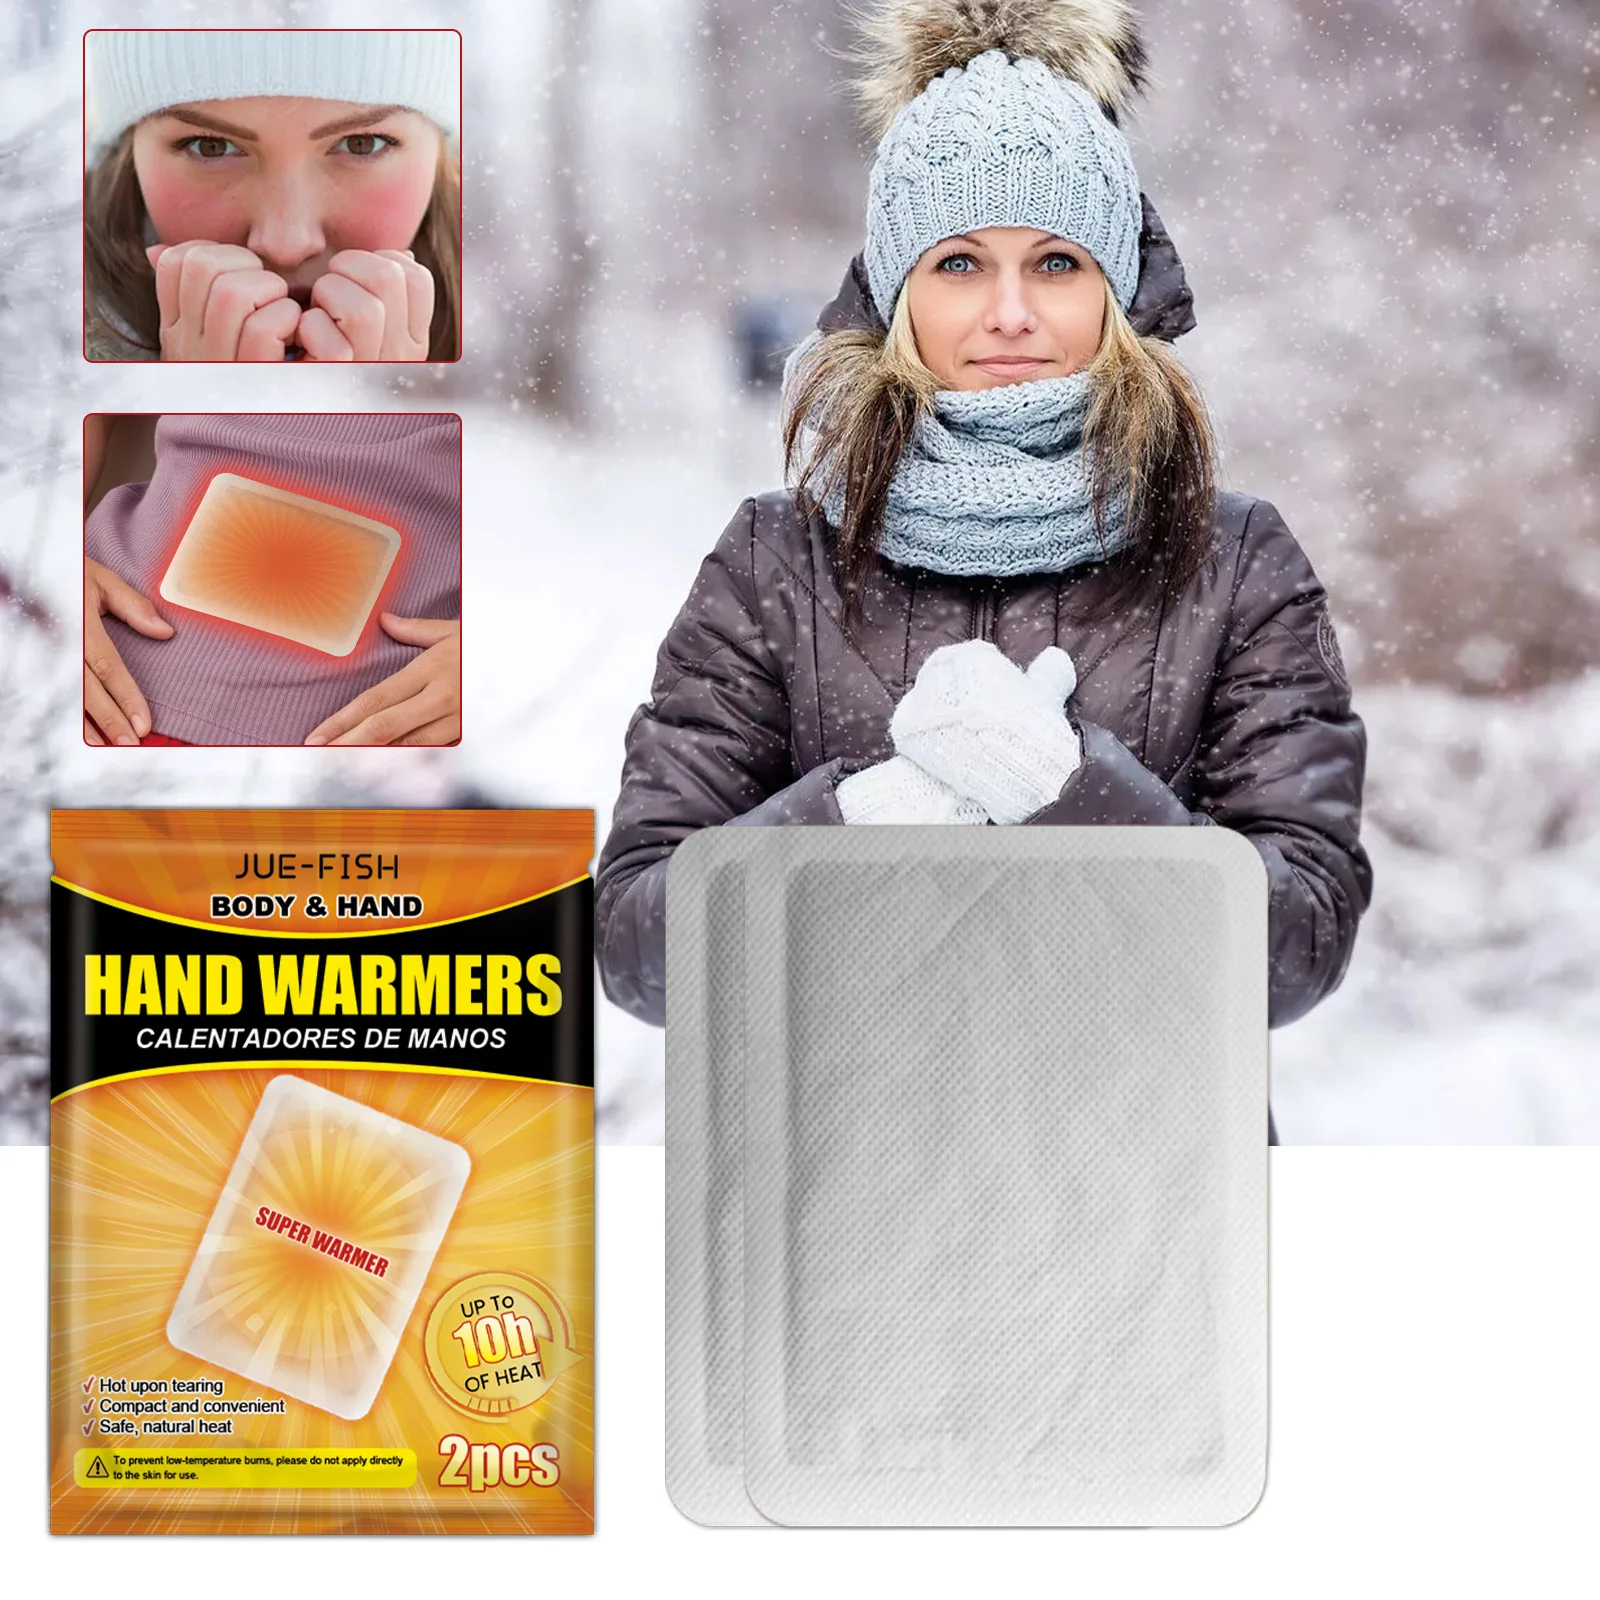 

2 pcs Universal Body Foot Warmer Sticker Self Adhesive Lasting Heat Patch Safe Hand Feet Warm Paste Pads Heating Insole Wholesal